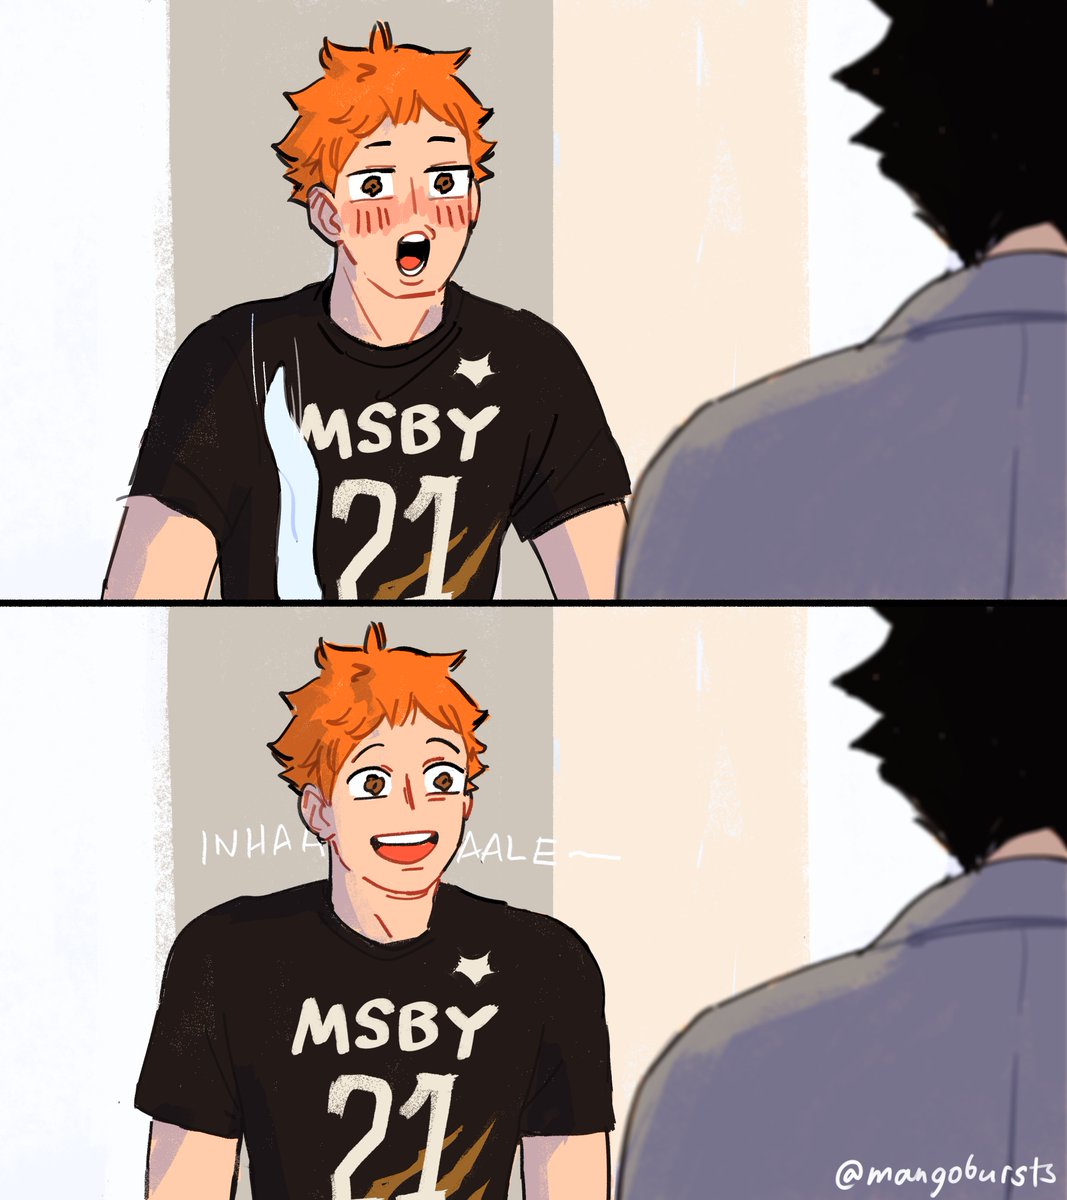 TFW YOUR LONG TIME SHIP GETS ENGAGED RIGHT BEFORE YOUR EYES #haikyuu #bokuaka 